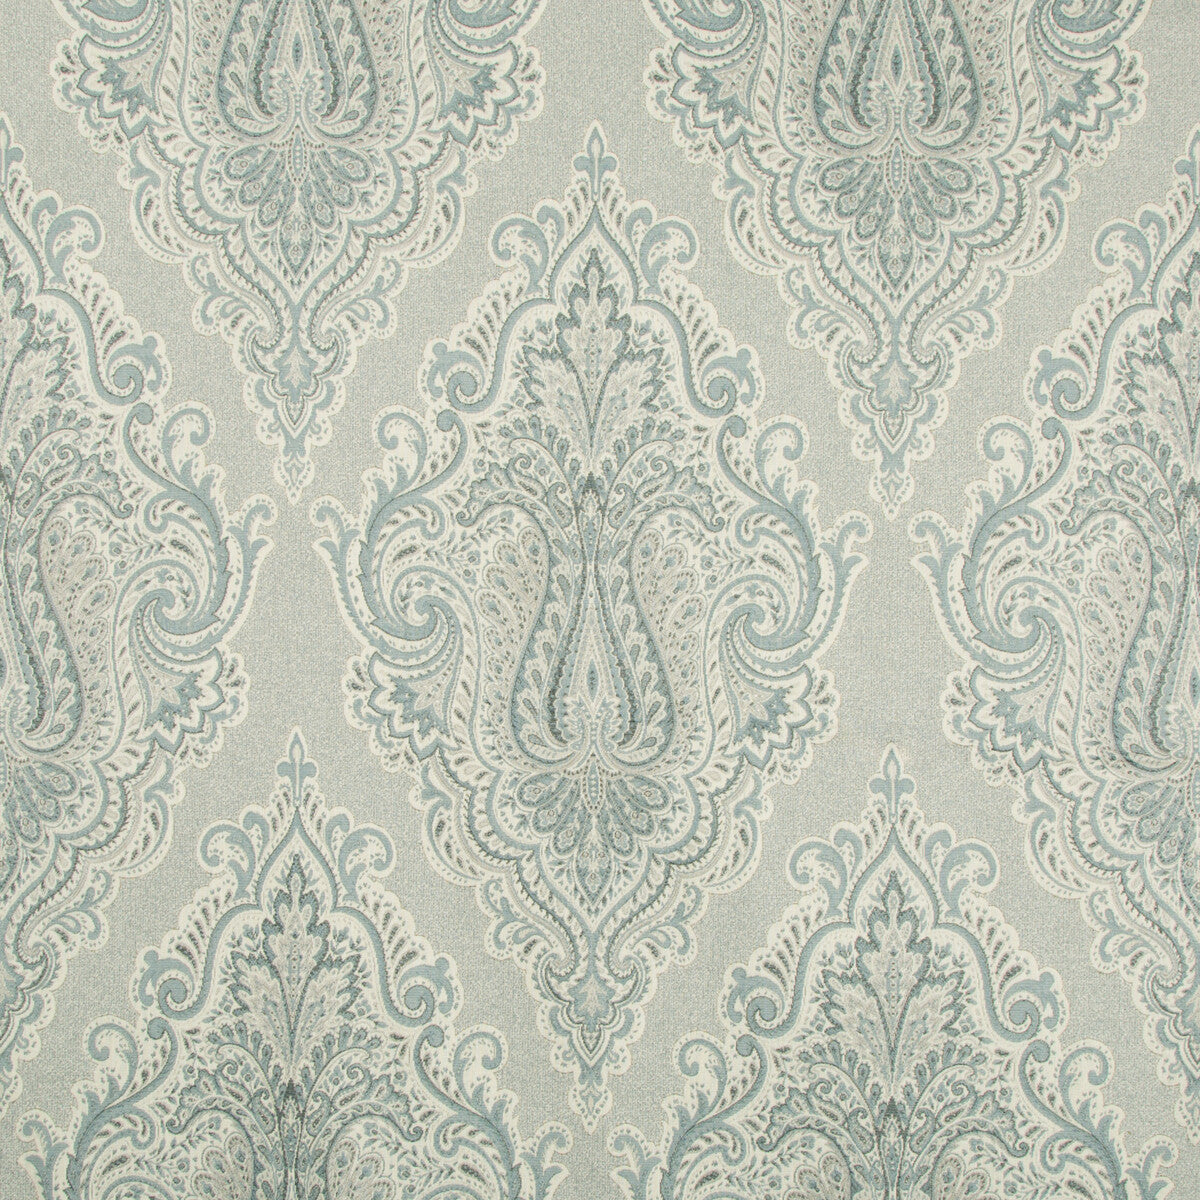 Kravet Design fabric in 34679-15 color - pattern 34679.15.0 - by Kravet Design in the Crypton Home collection